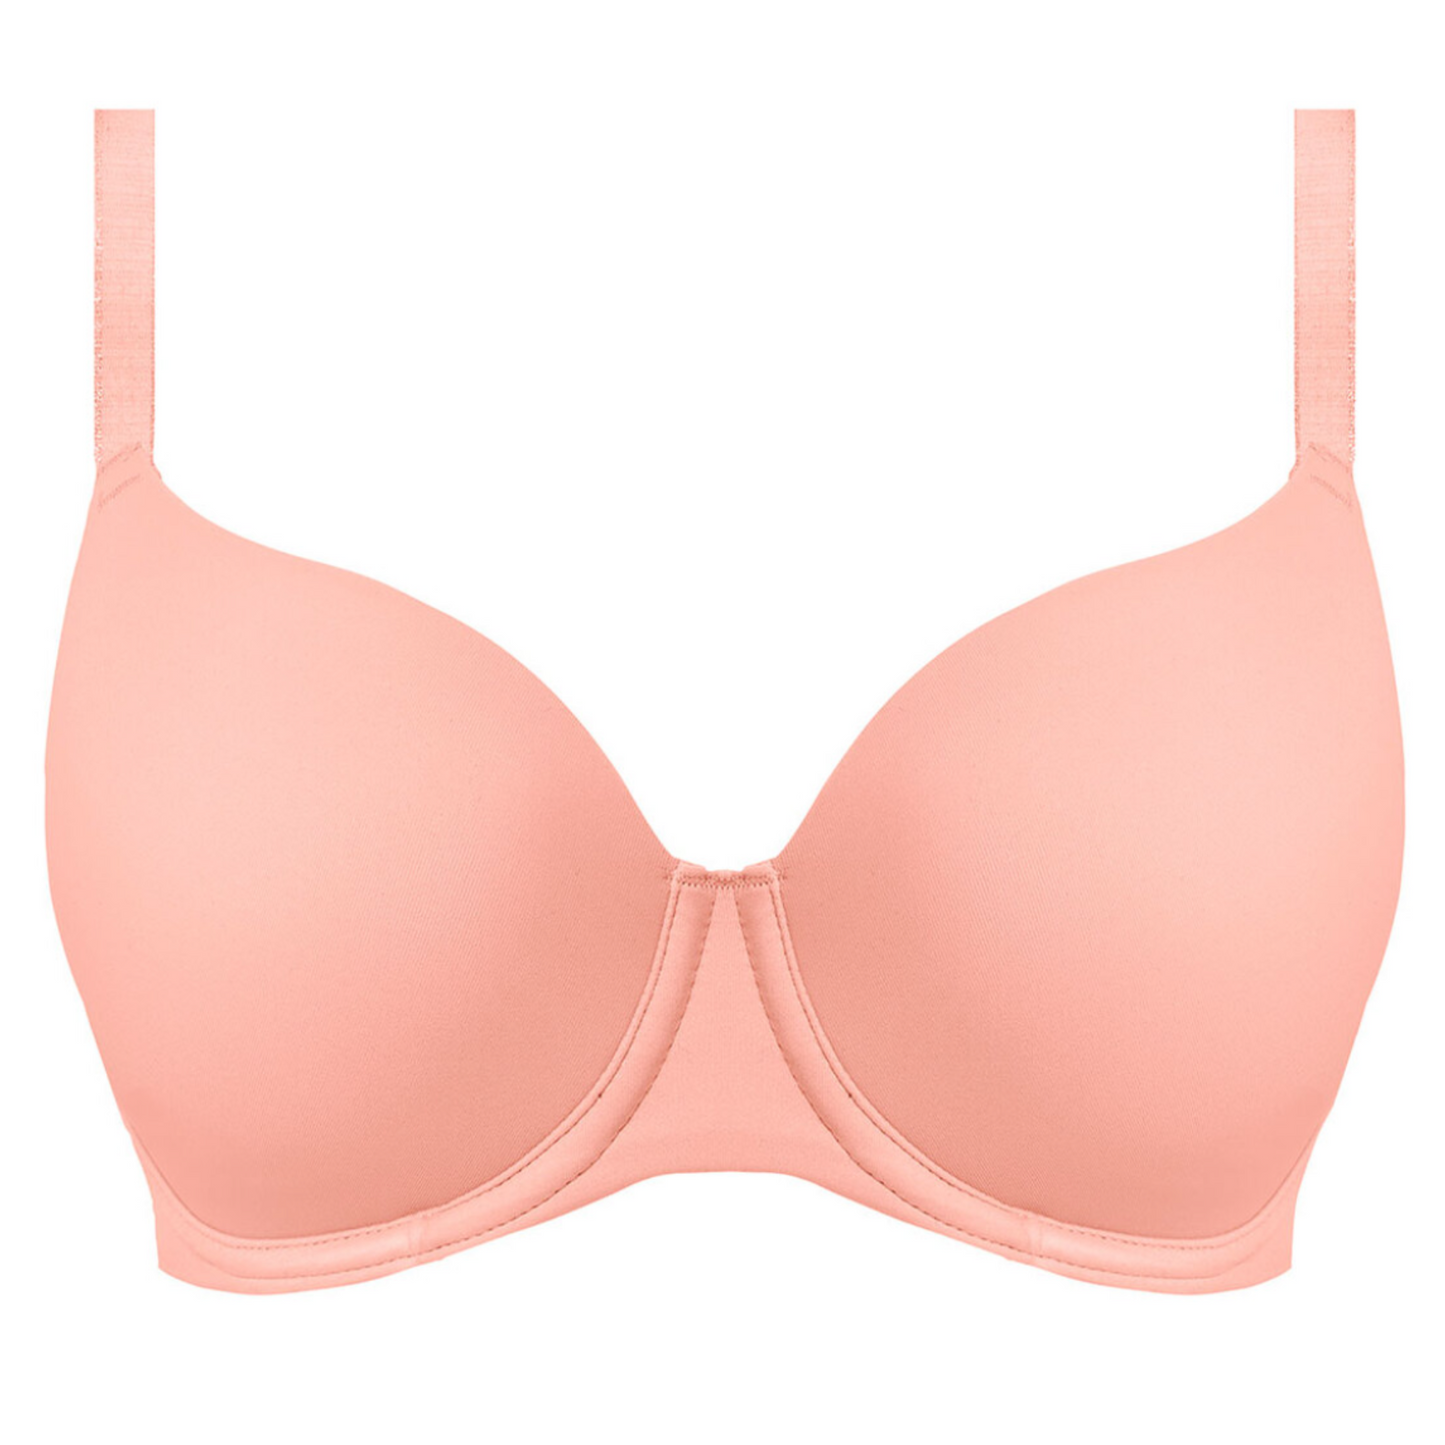 Freya Undetected Underwire Moulded T-Shirt Bra